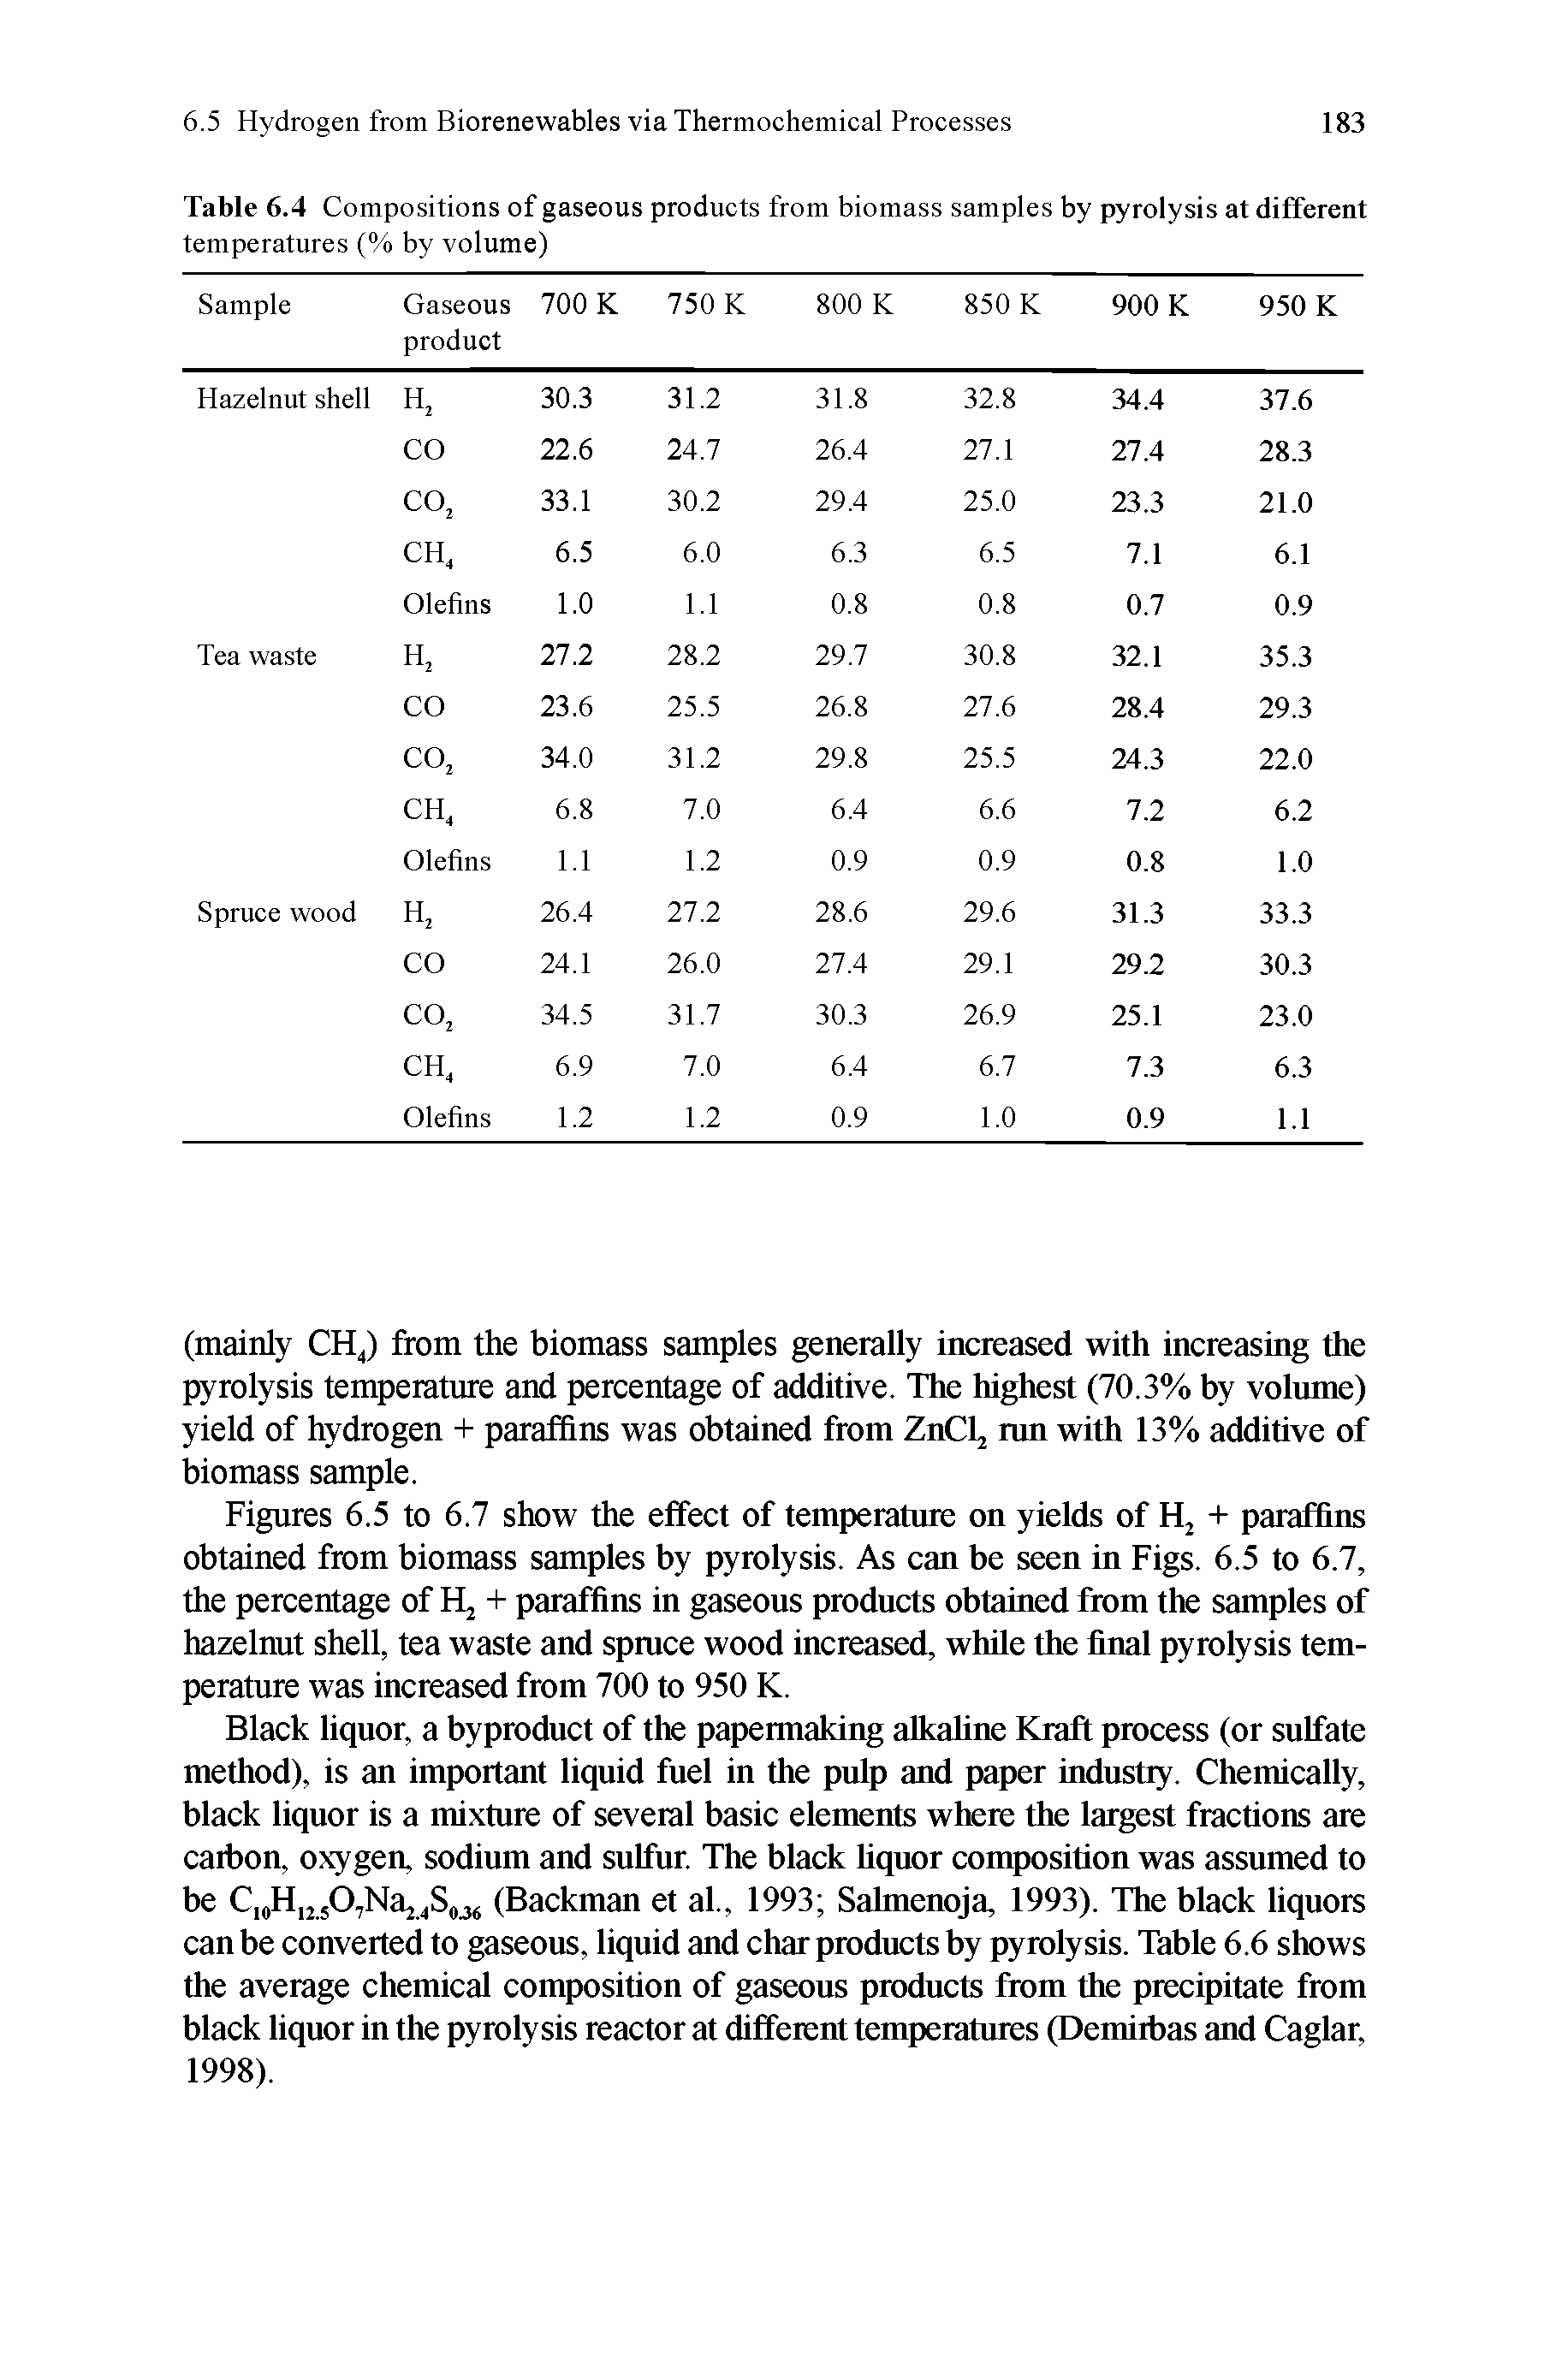 Figures 6.5 to 6.7 show the effect of temperature on yields of + paraffins obtained from biomass samples by pyrolysis. As can be seen in Figs. 6.5 to 6.7, the percentage of + paraffins in gaseous products obtained from the samples of hazelnut shell, tea waste and spmce wood increased, while the final pyrolysis temperature was increased from 700 to 950 K.